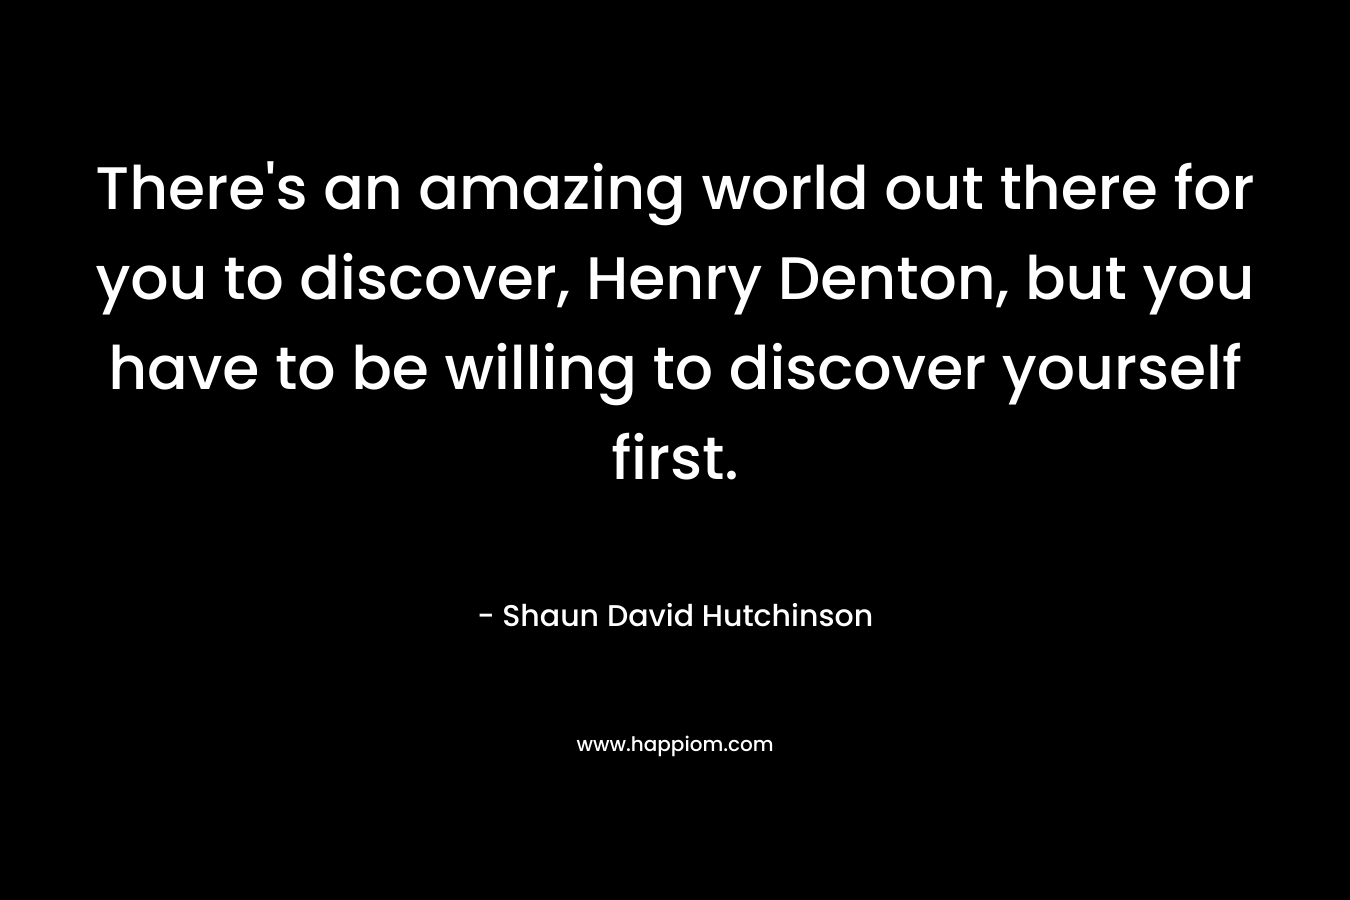 There's an amazing world out there for you to discover, Henry Denton, but you have to be willing to discover yourself first.